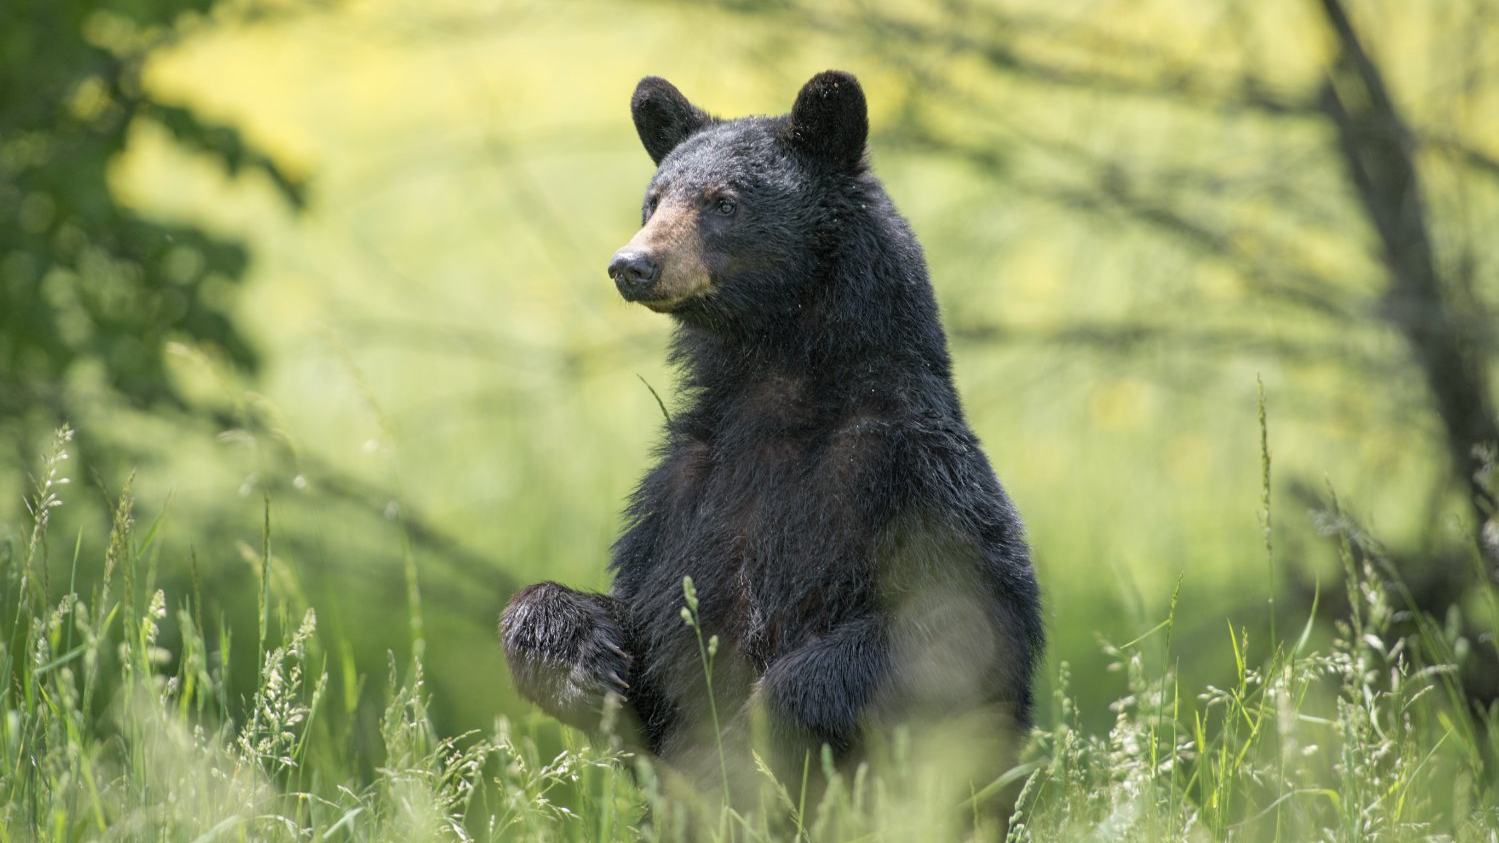 Does A Bear Sh*t Plastic In The Woods? According To This Latest Study, Yes They Do